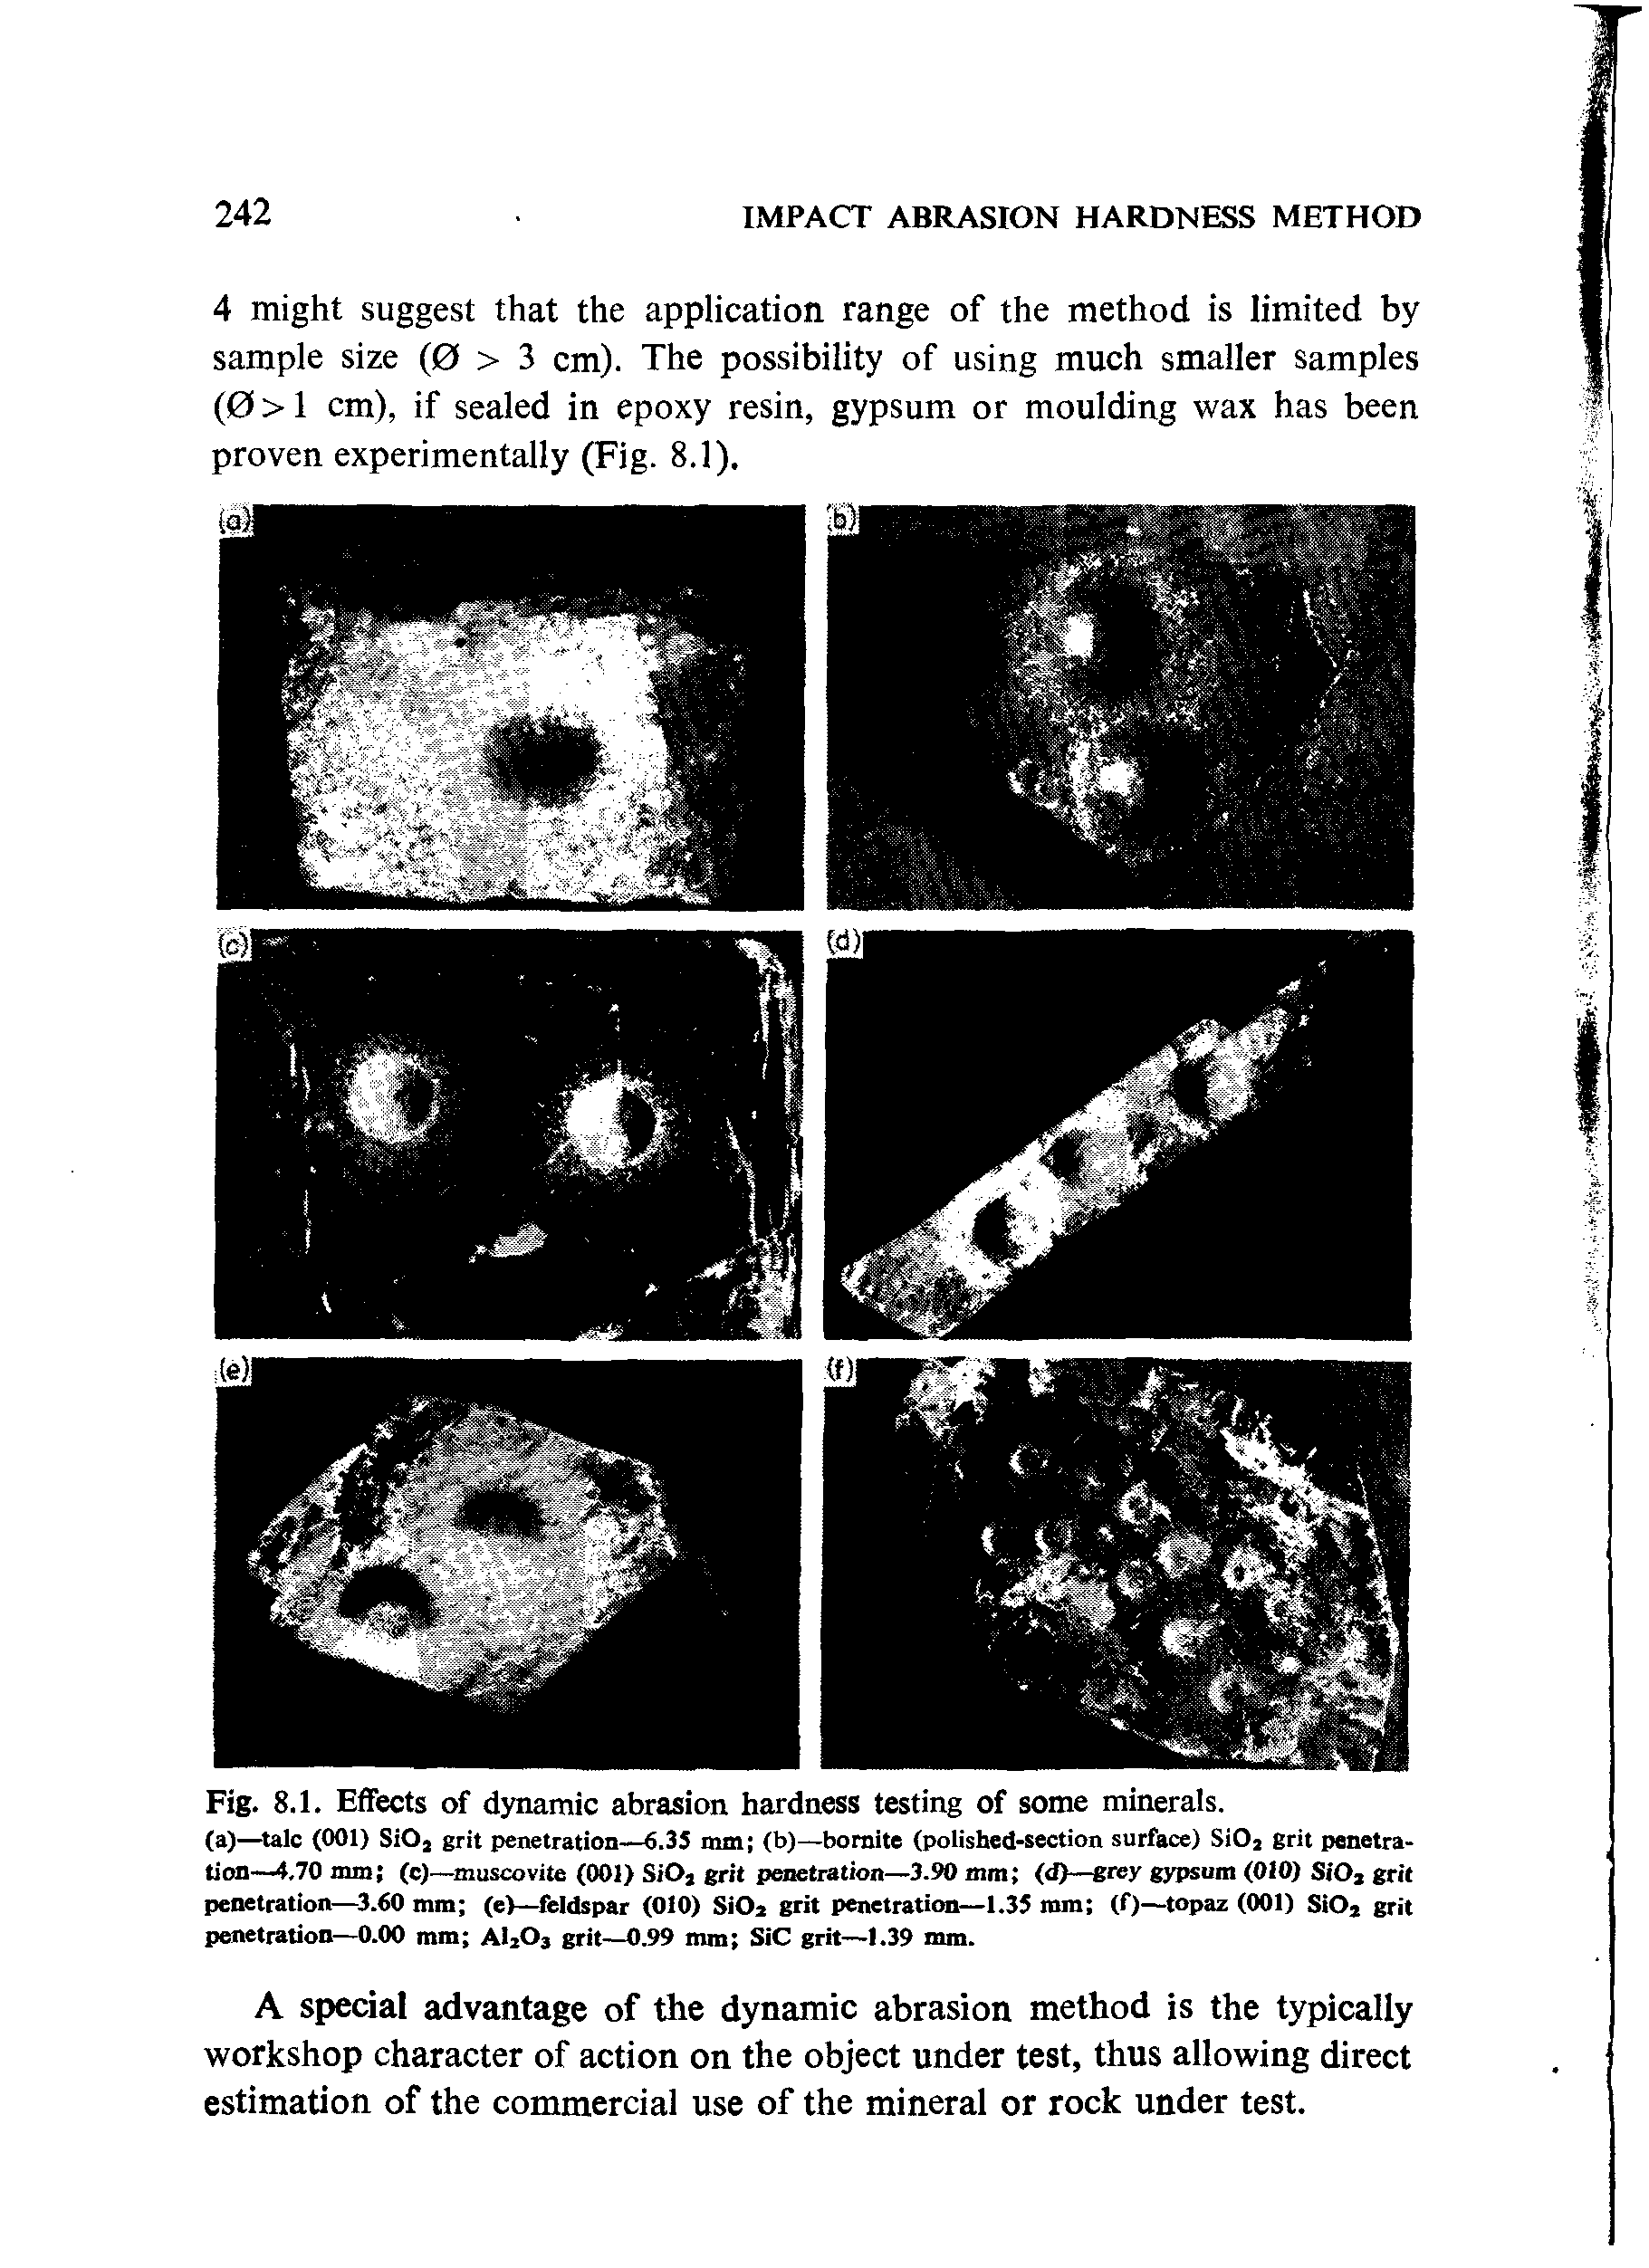 Fig. 8.1. Effects of dynamic abrasion hardness testing of some minerals.